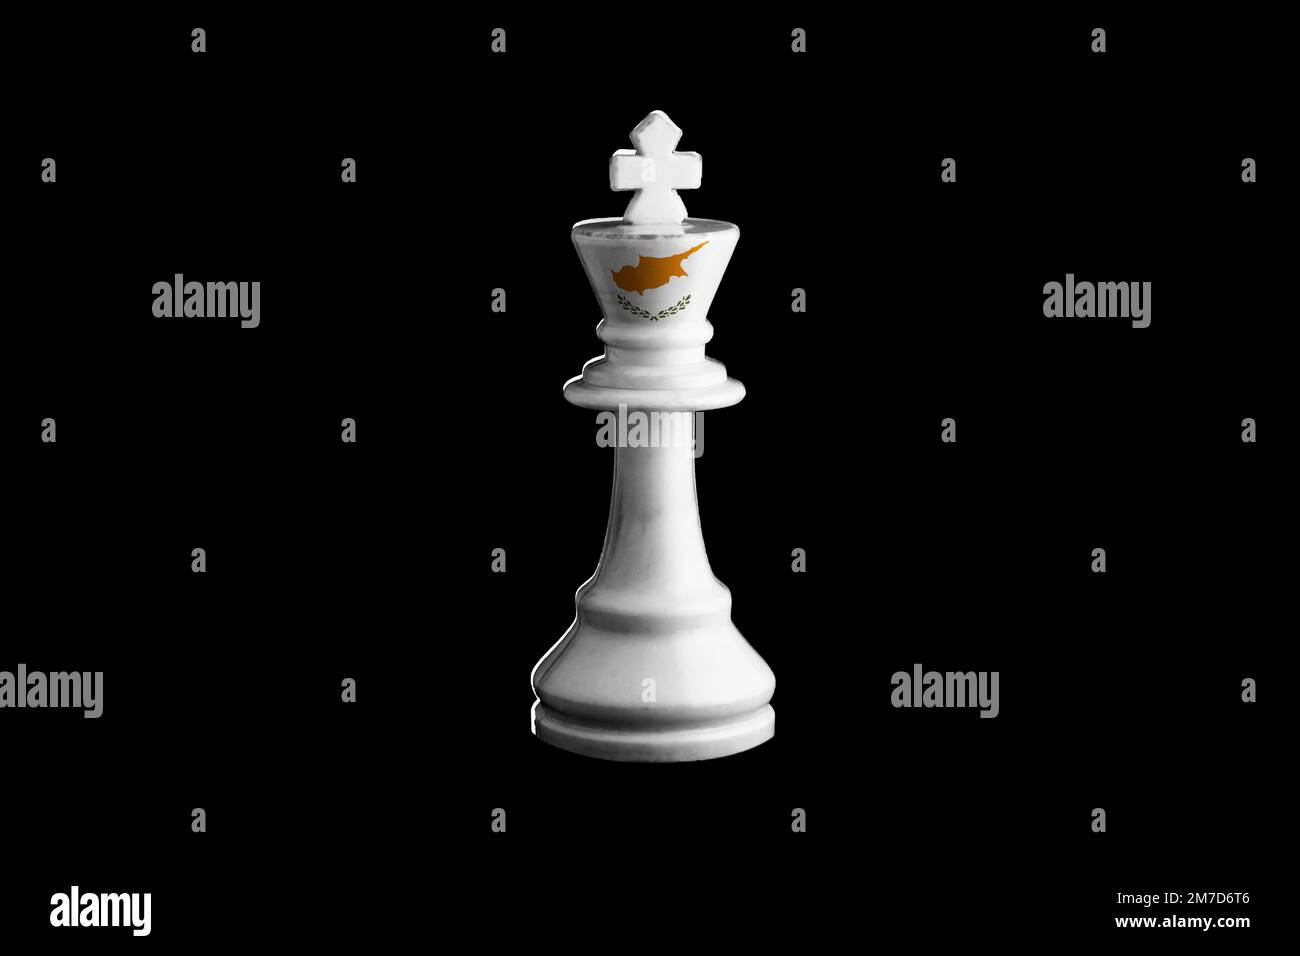 Cyprus flags paint over on chess king. 3D illustration. Stock Photo